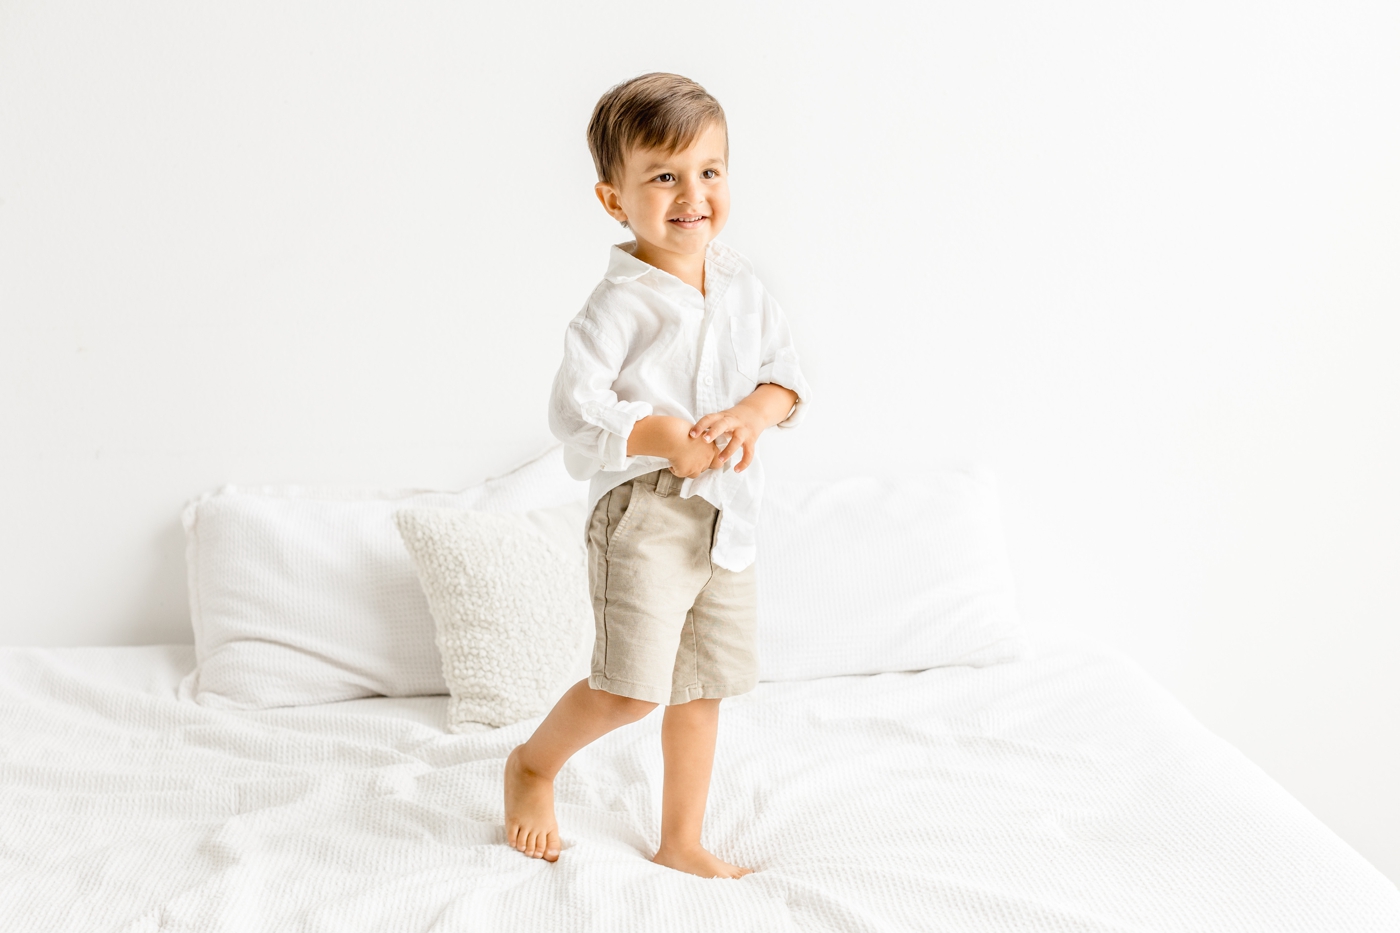 Little boy smiling on bed in Austin, TX studio. Photo by full service family photographer, Sana Ahmed Photography.